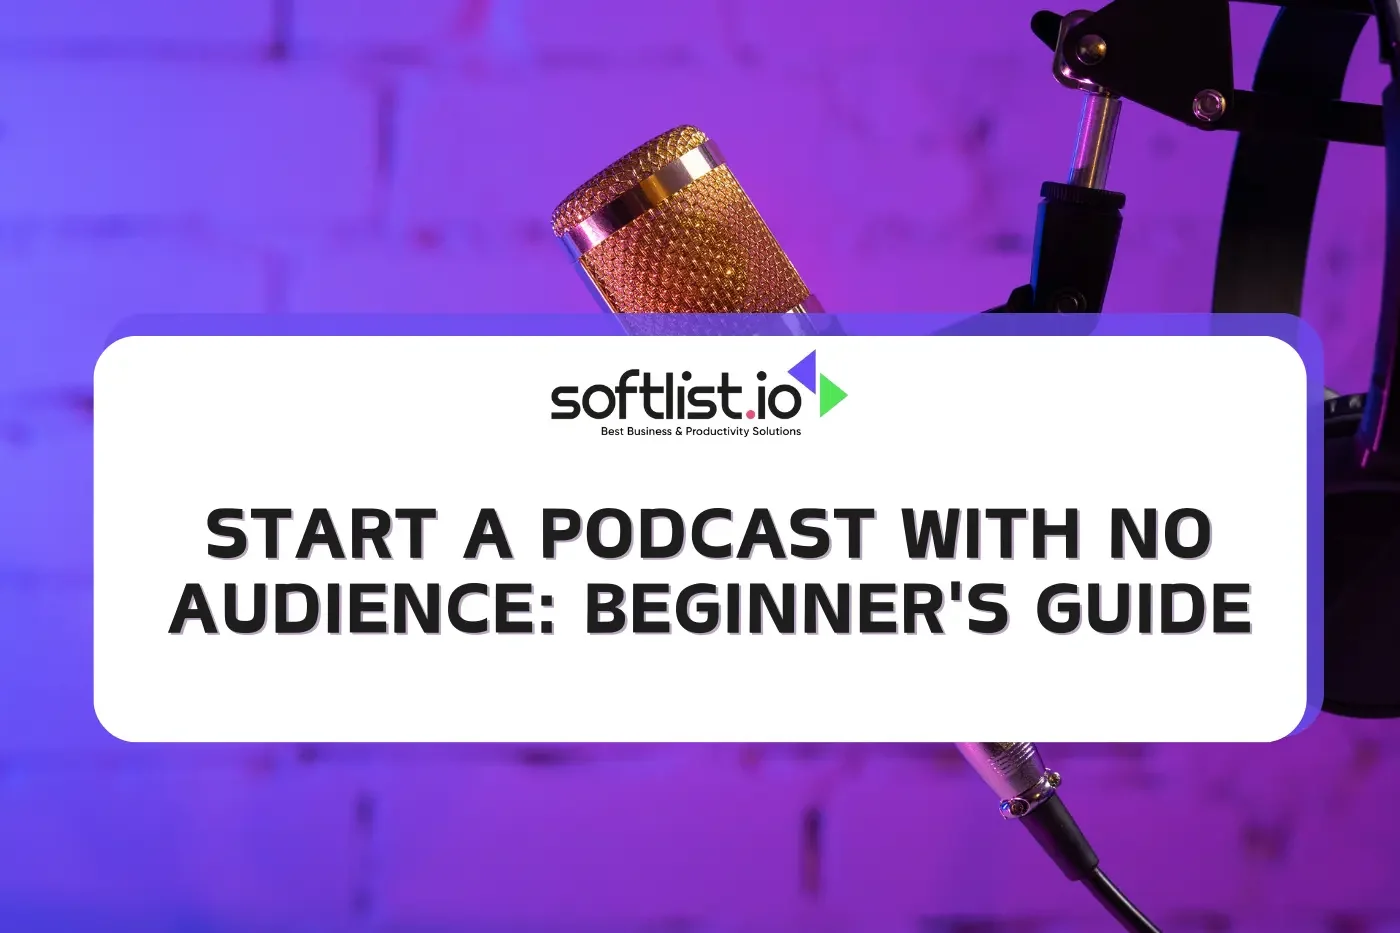 Start a Podcast With No Audience